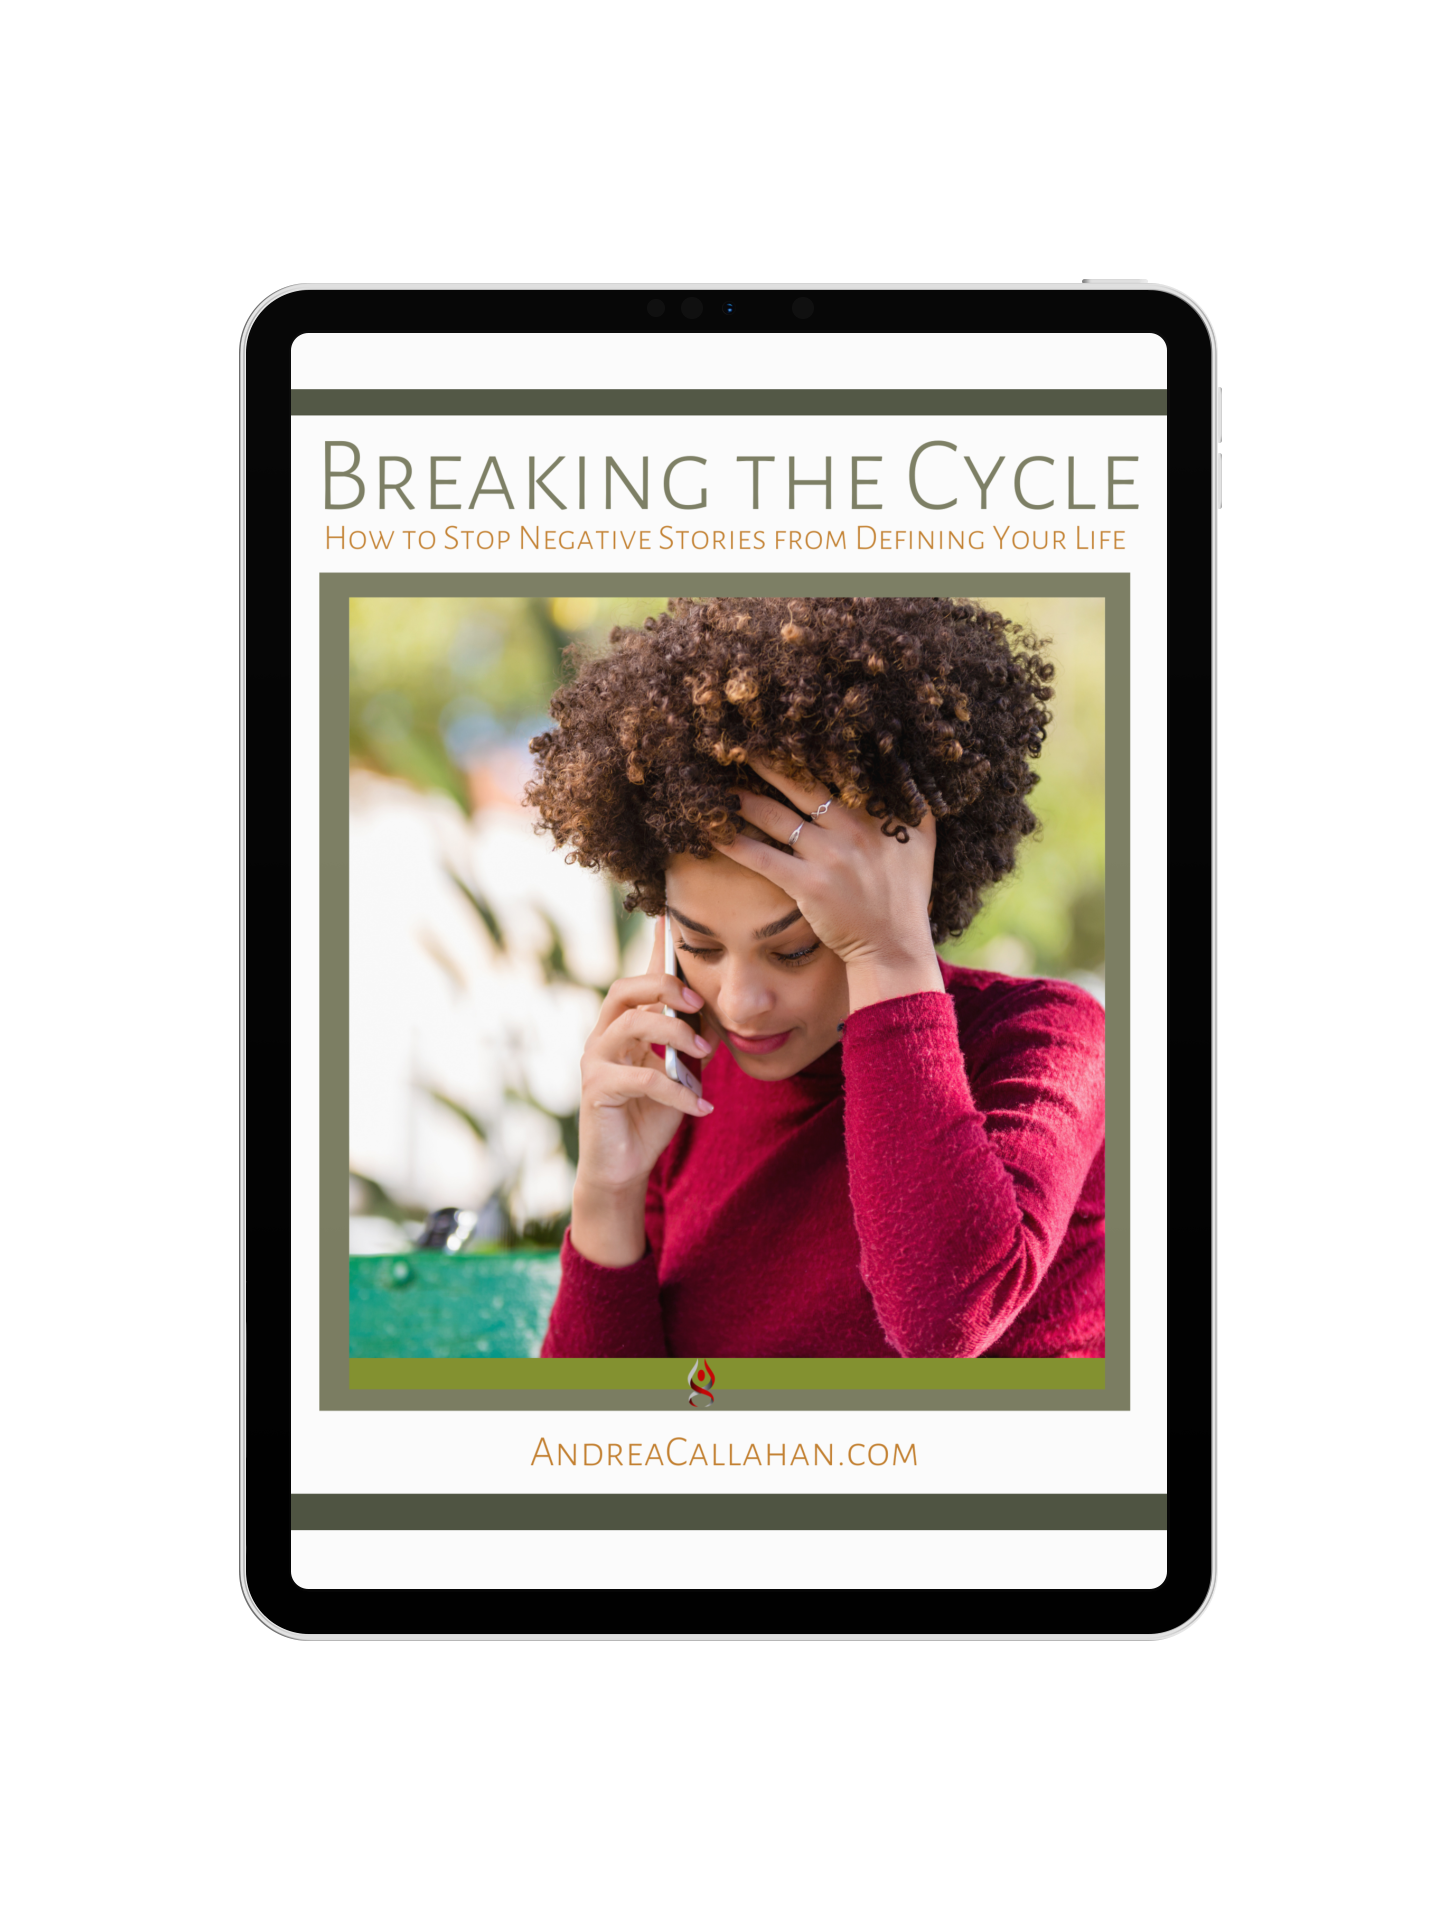 Breaking the Cycle free course